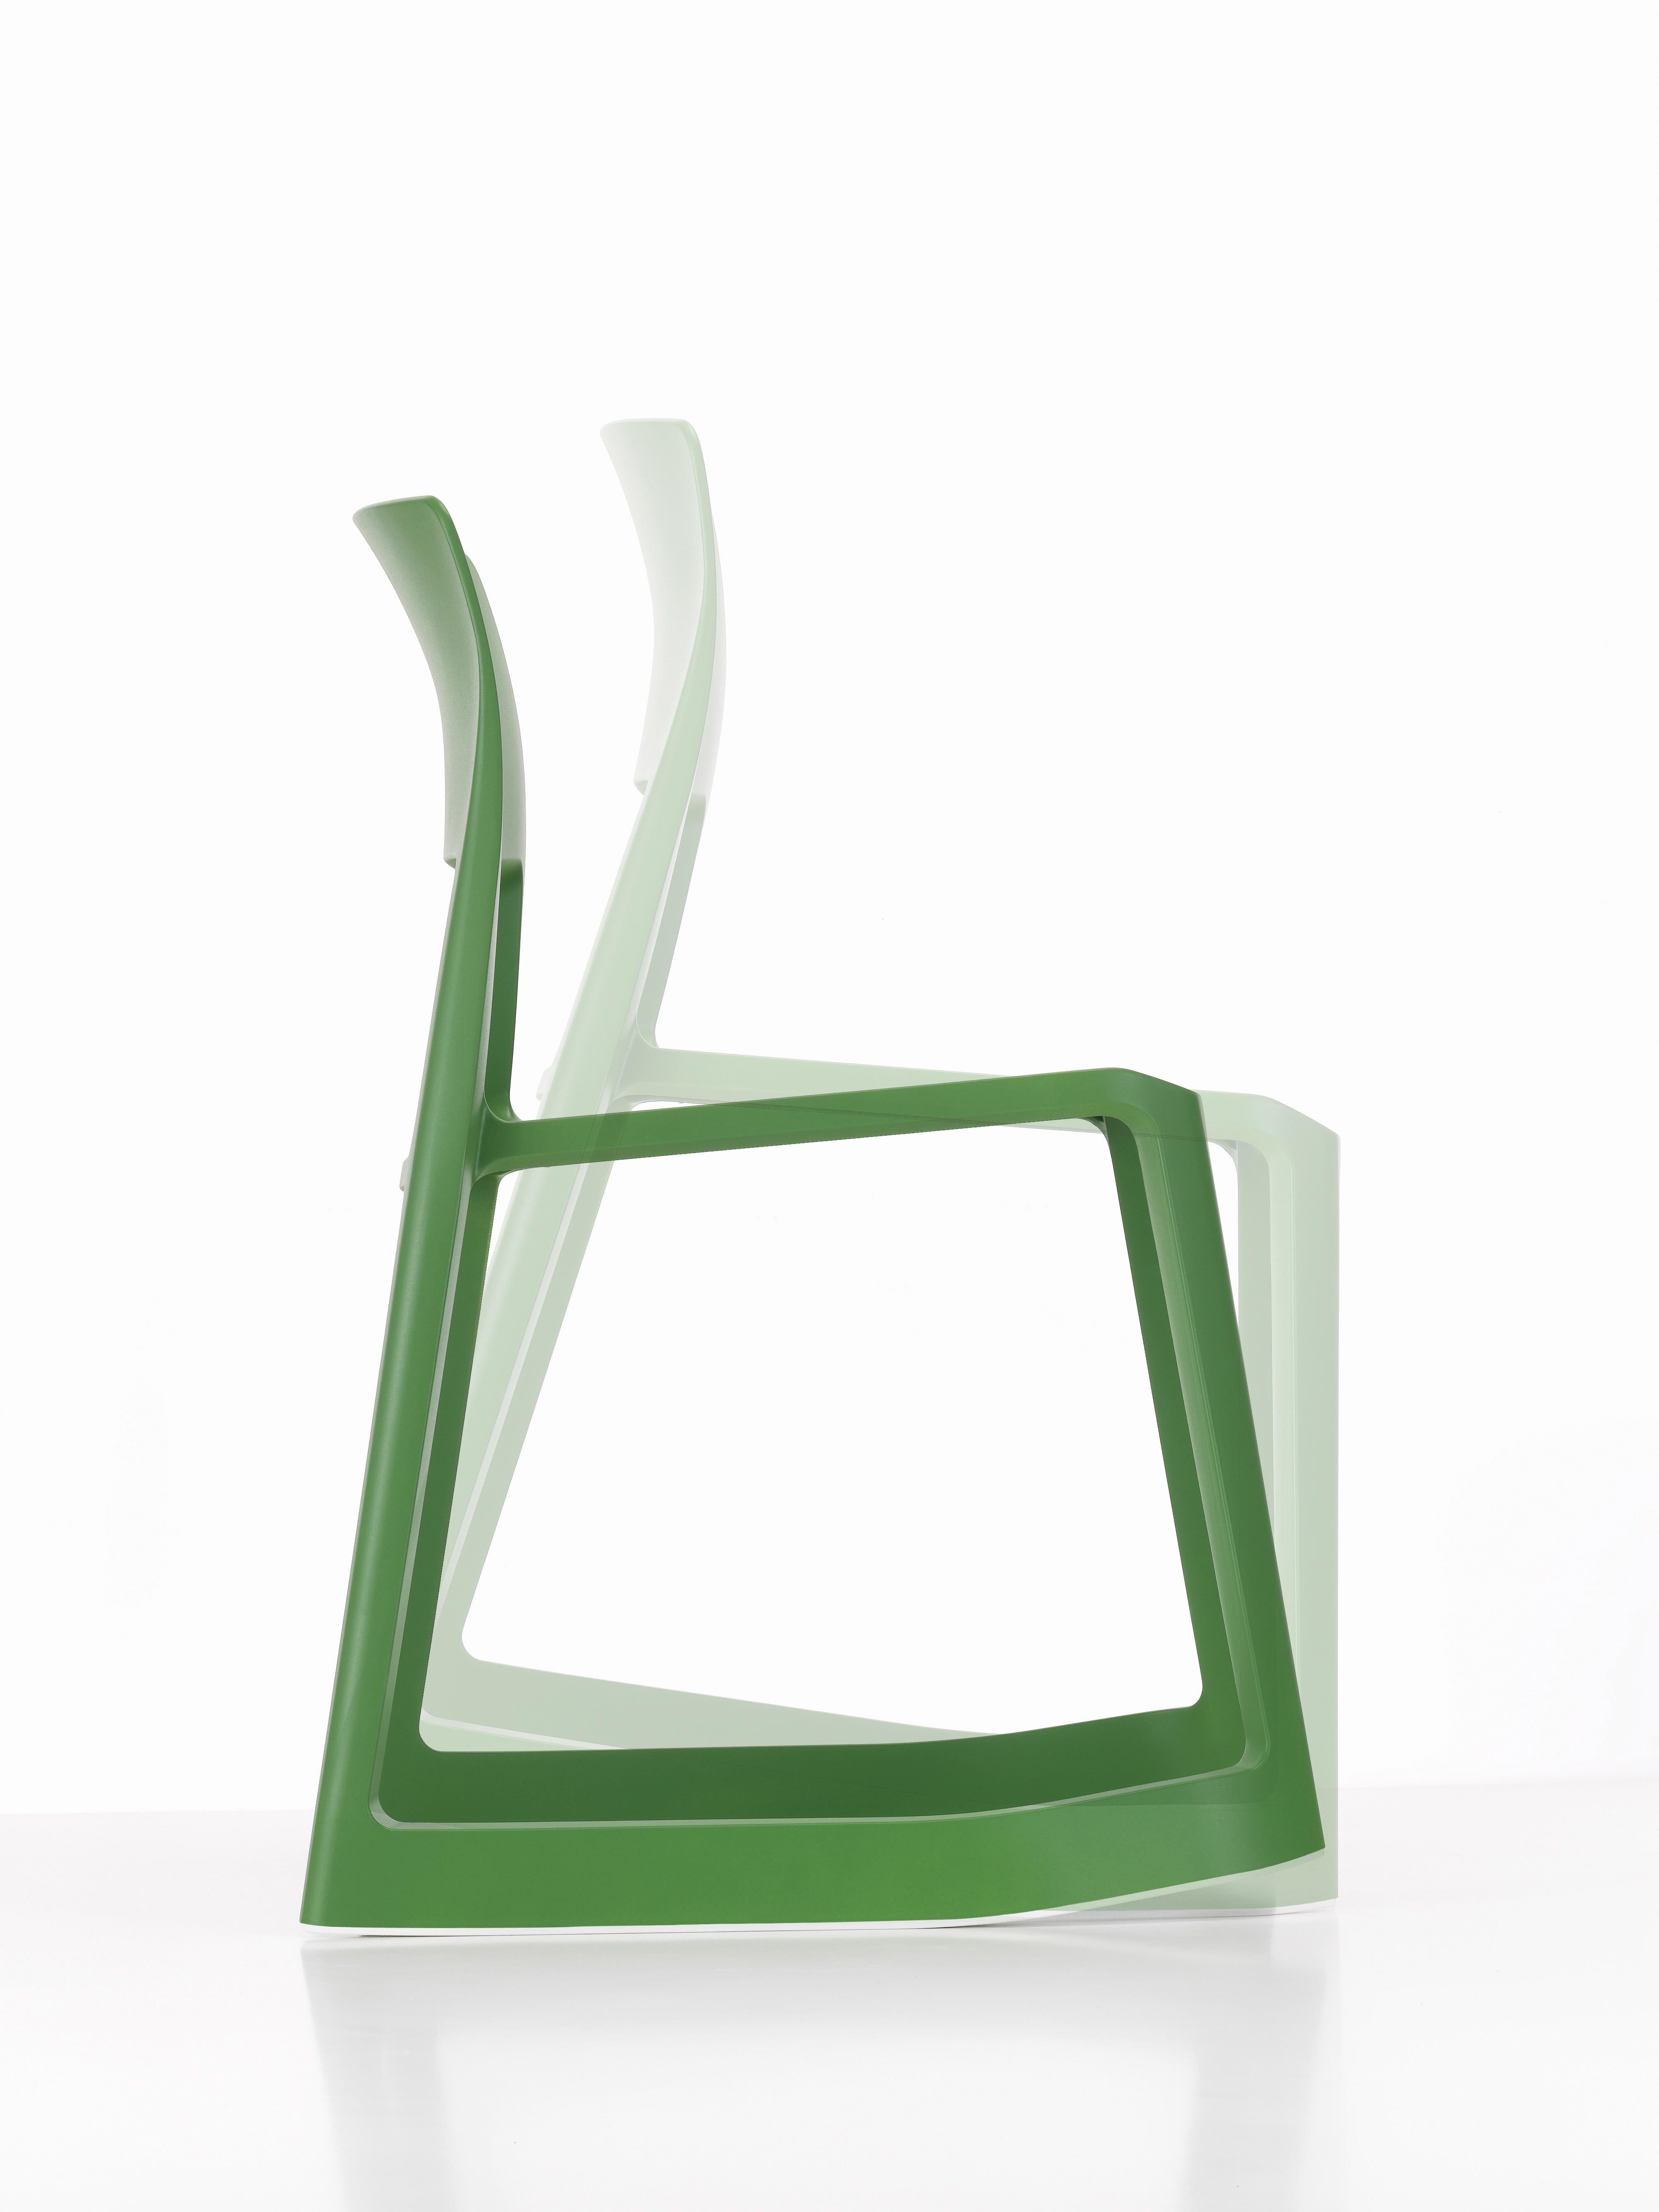 Tip Ton defines a whole new chair typology: the solid plastic chair with forward-tilt action. Its name refers to the characteristic dual sitting postures – from a normal position, Tip Ton can be tilted forward a few degrees where the chair then